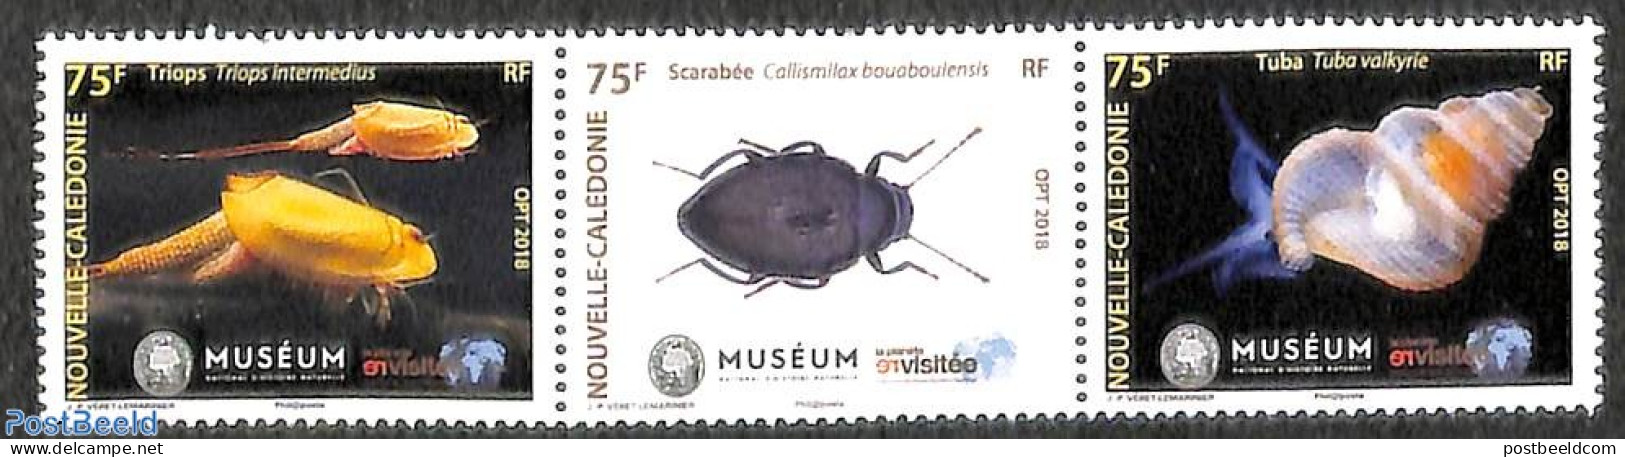 New Caledonia 2018 Museum Revisitee 3v [::], Mint NH, Nature - Insects - Shells & Crustaceans - Art - Museums - Unused Stamps